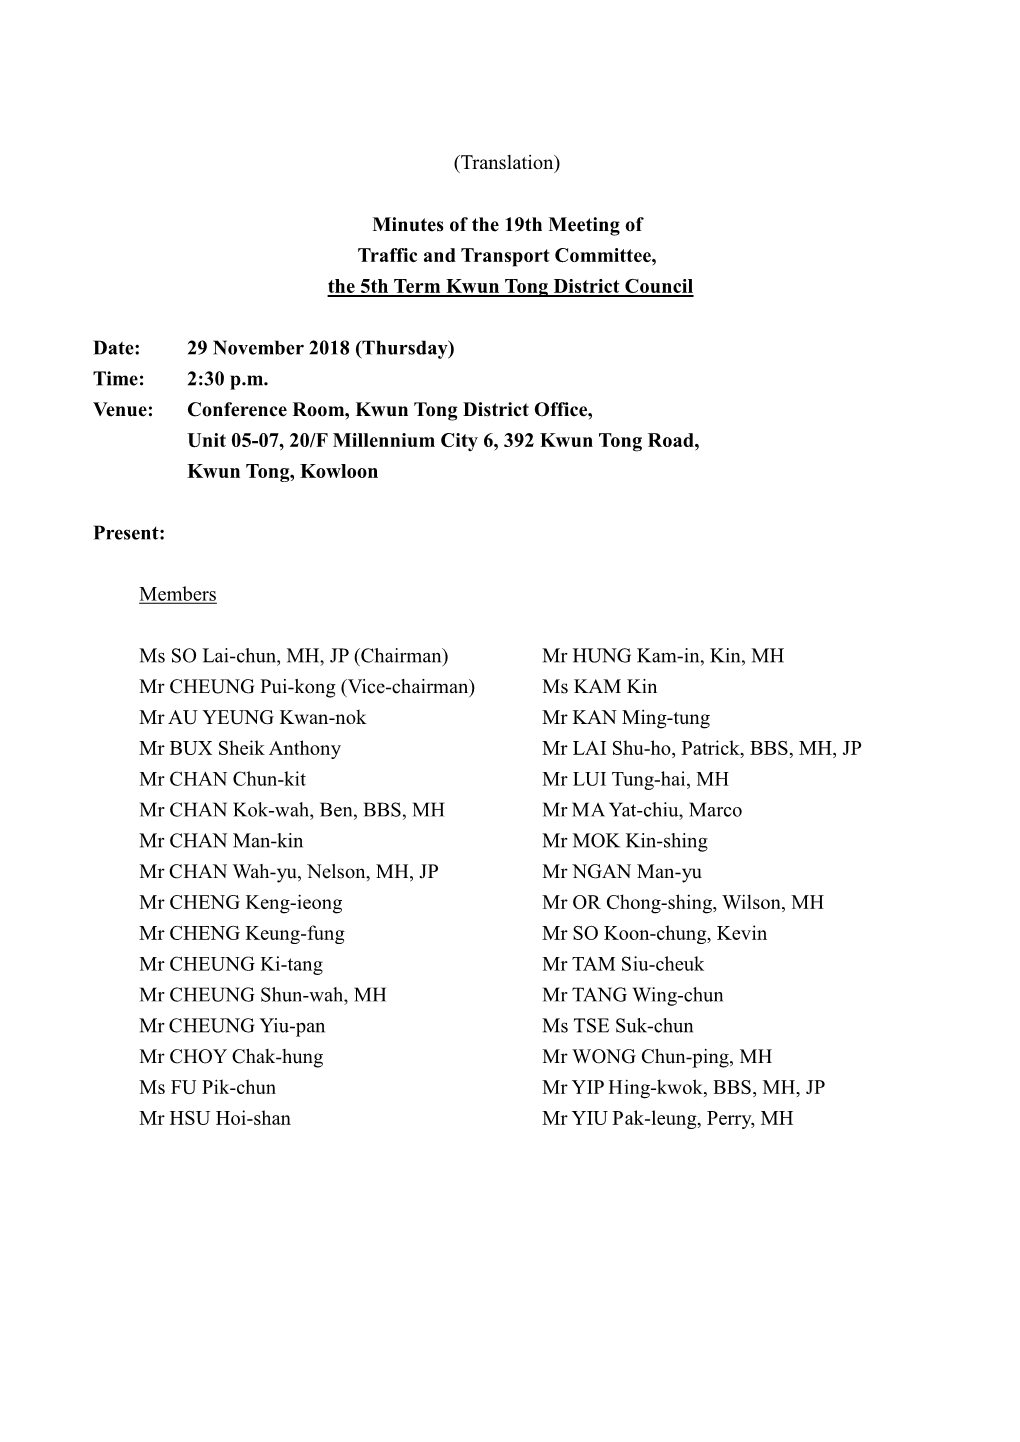 Minutes of the 19Th Meeting of Traffic and Transport Committee, the 5Th Term Kwun Tong District Council